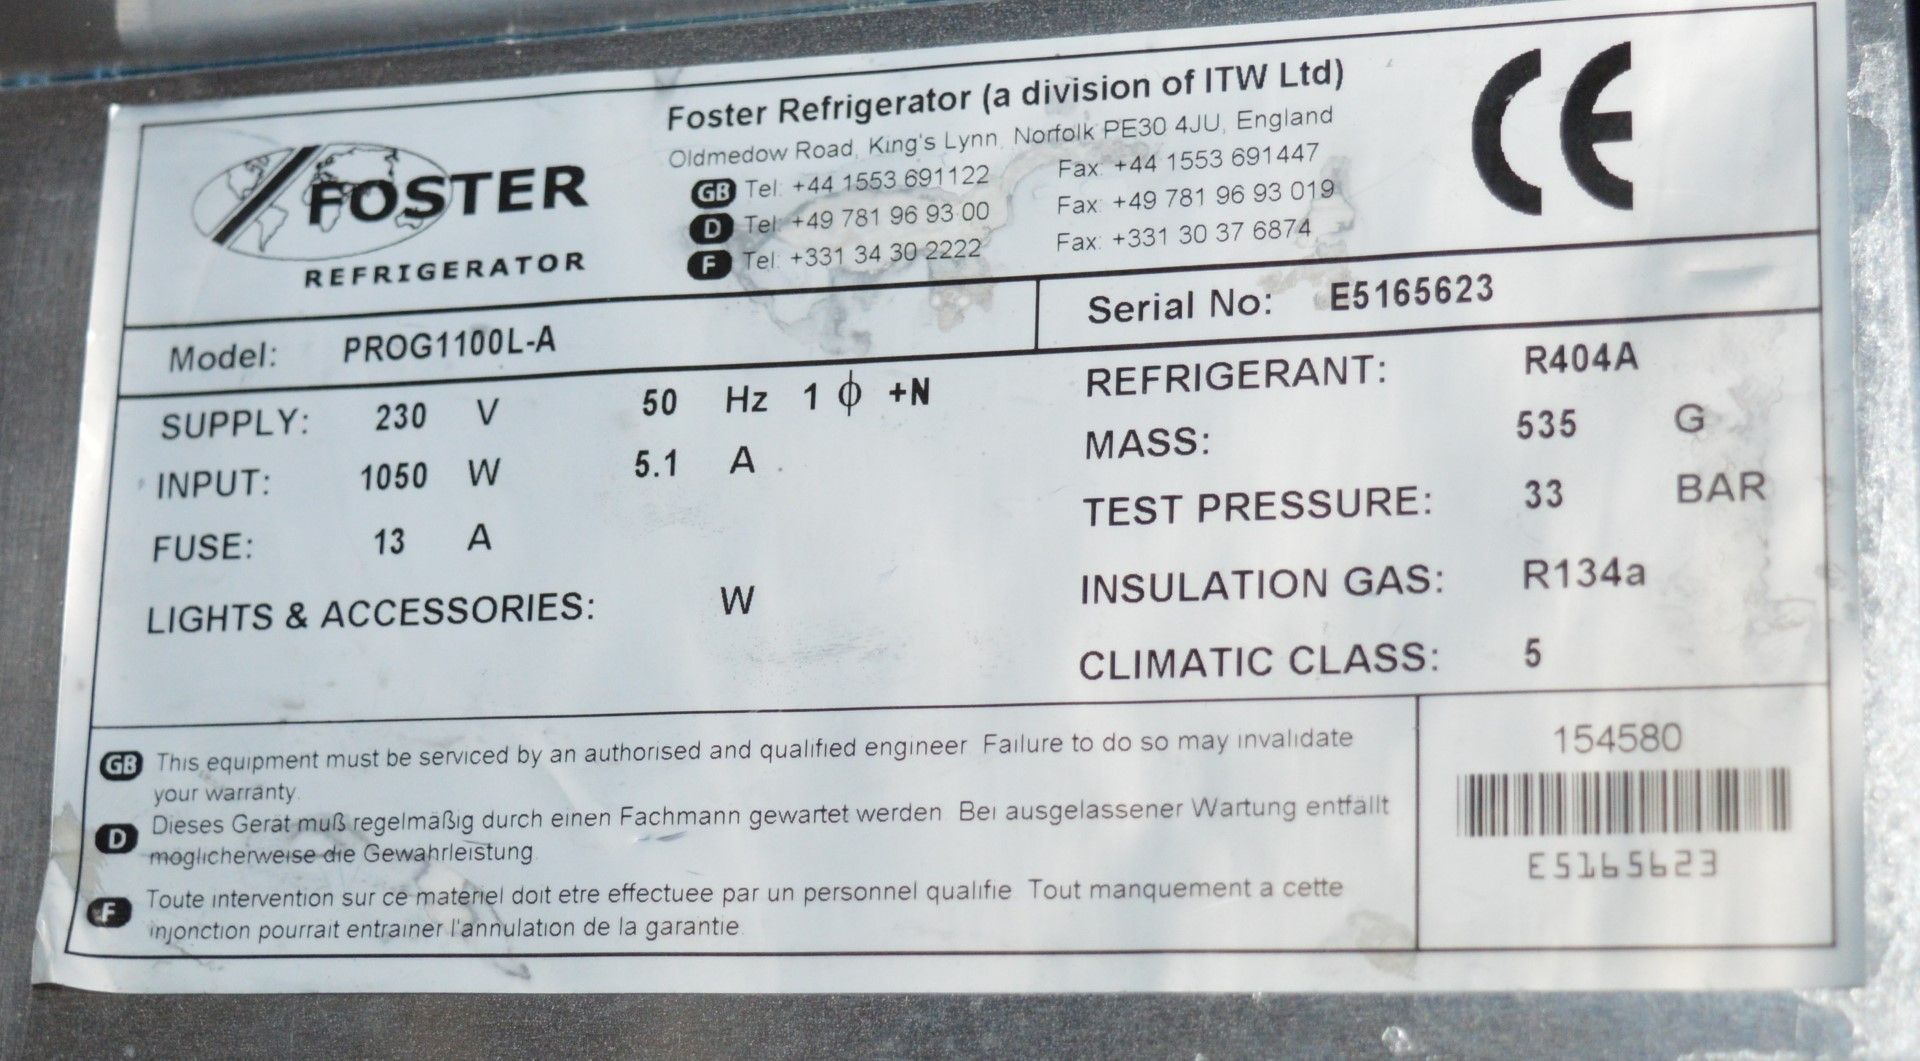 1 x Foster ProG1100L-A Gastro Pro 1100 Litre Stainless Steal Commercial Freezer - Aluminium Interior - Image 8 of 8